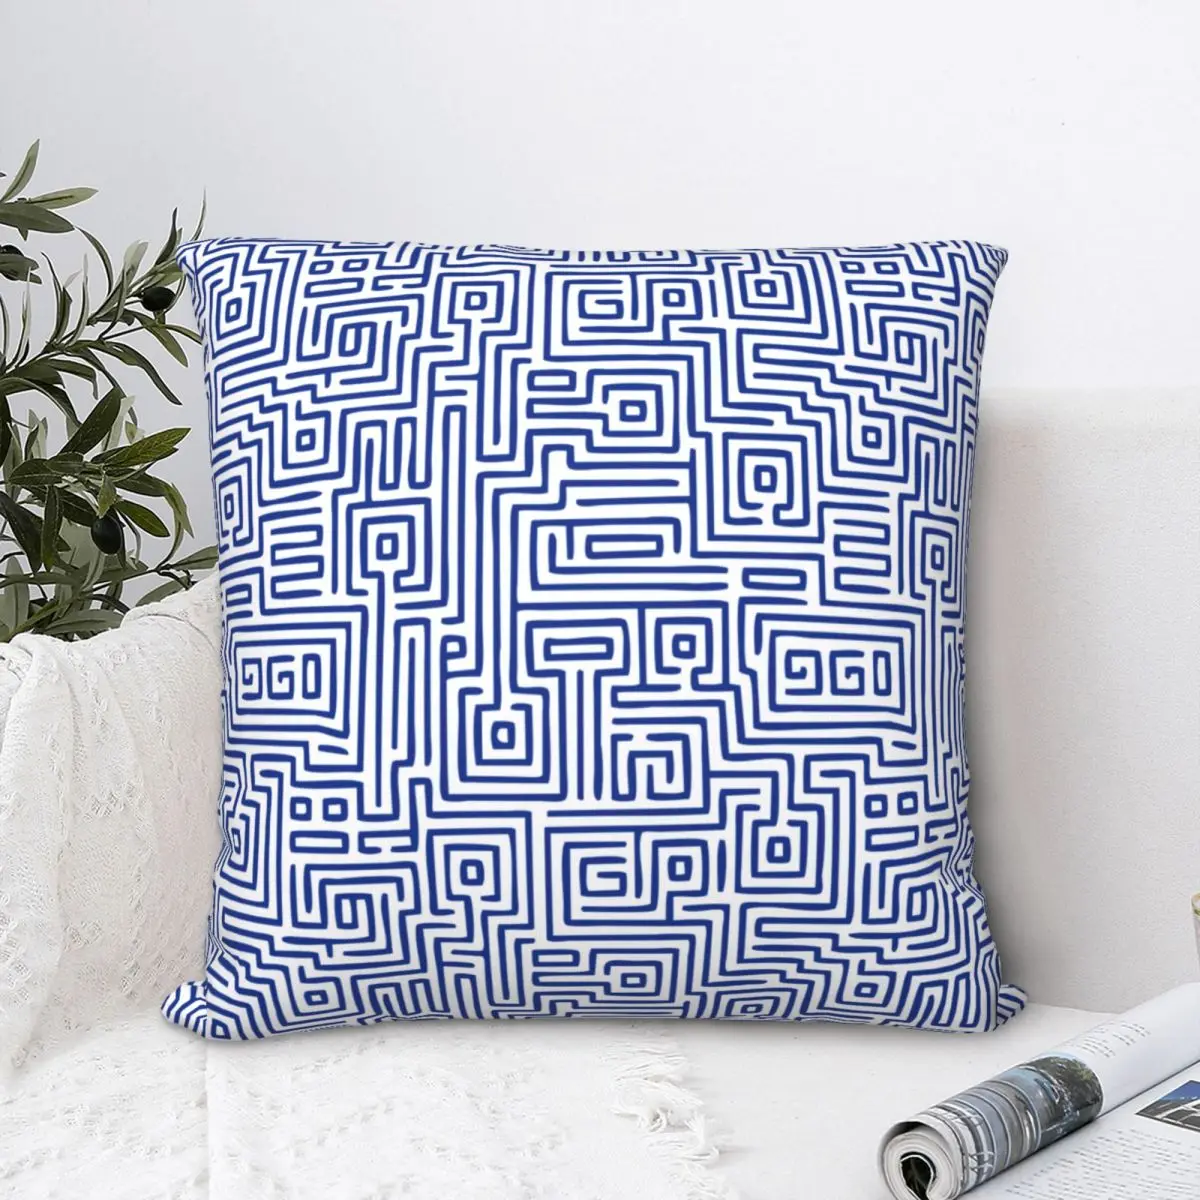 

Kuba Style Maze Pattern Square Pillowcase Cushion Cover Spoof Home Decorative Polyester Throw Pillow Case Car Nordic 45*45cm